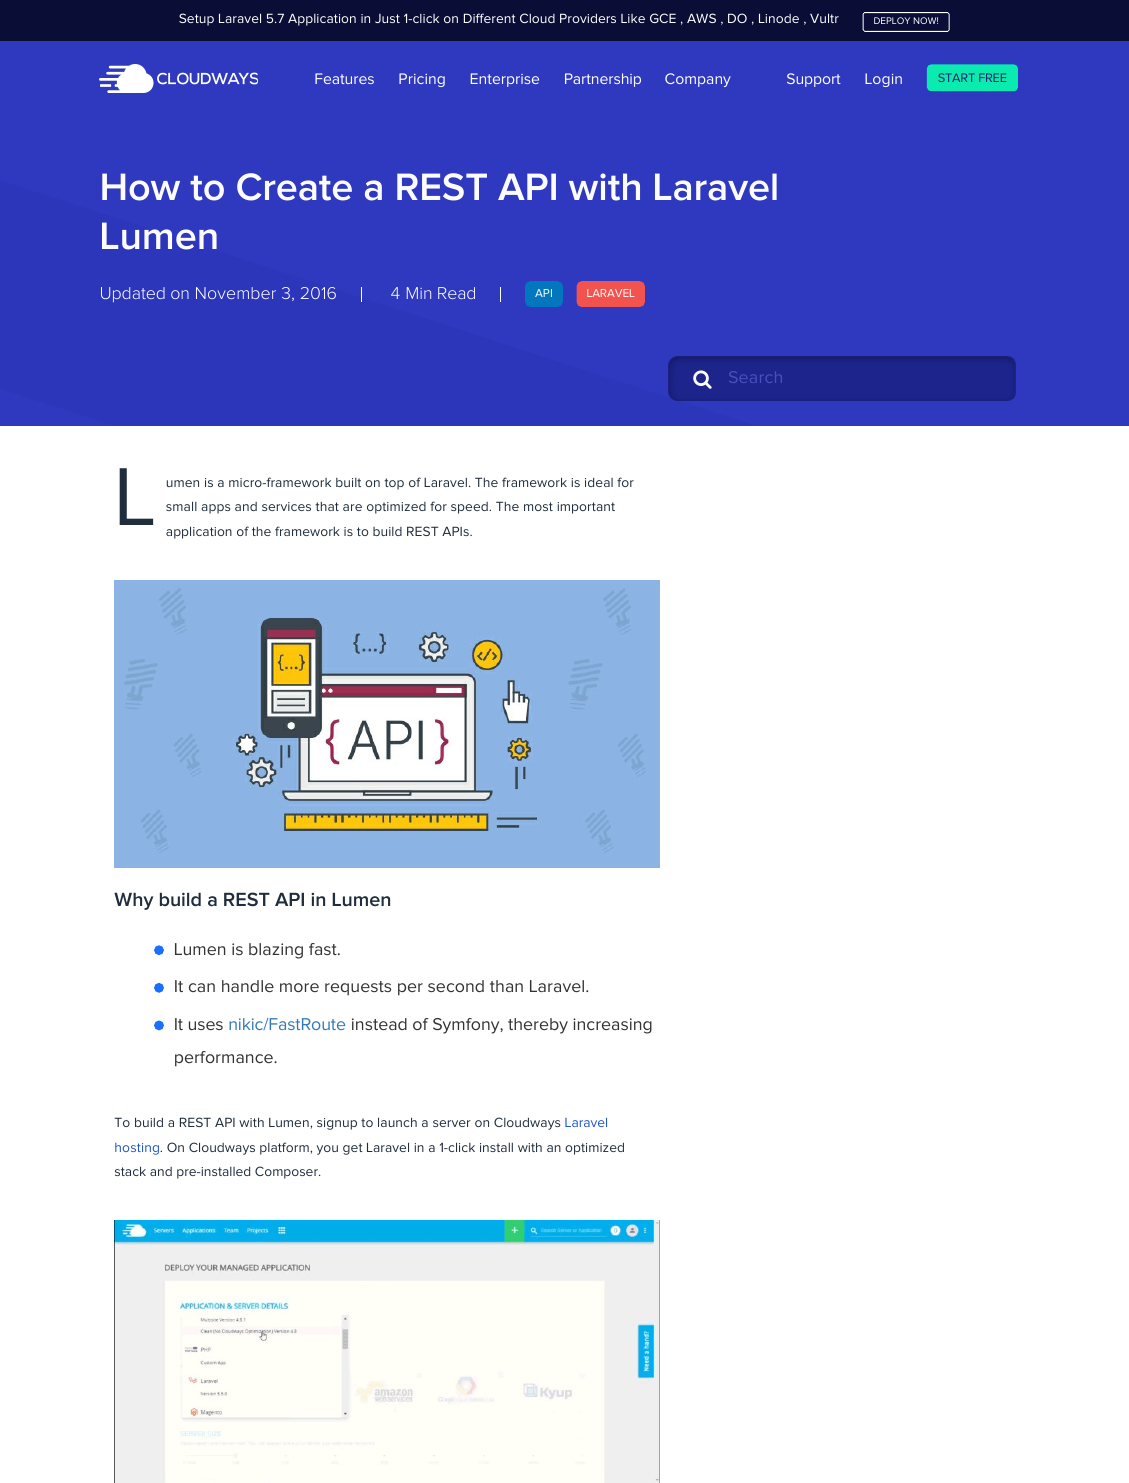 Page 1 of 9 - 10 Guide REST API With Lumen (cloudways.com) (web-page)